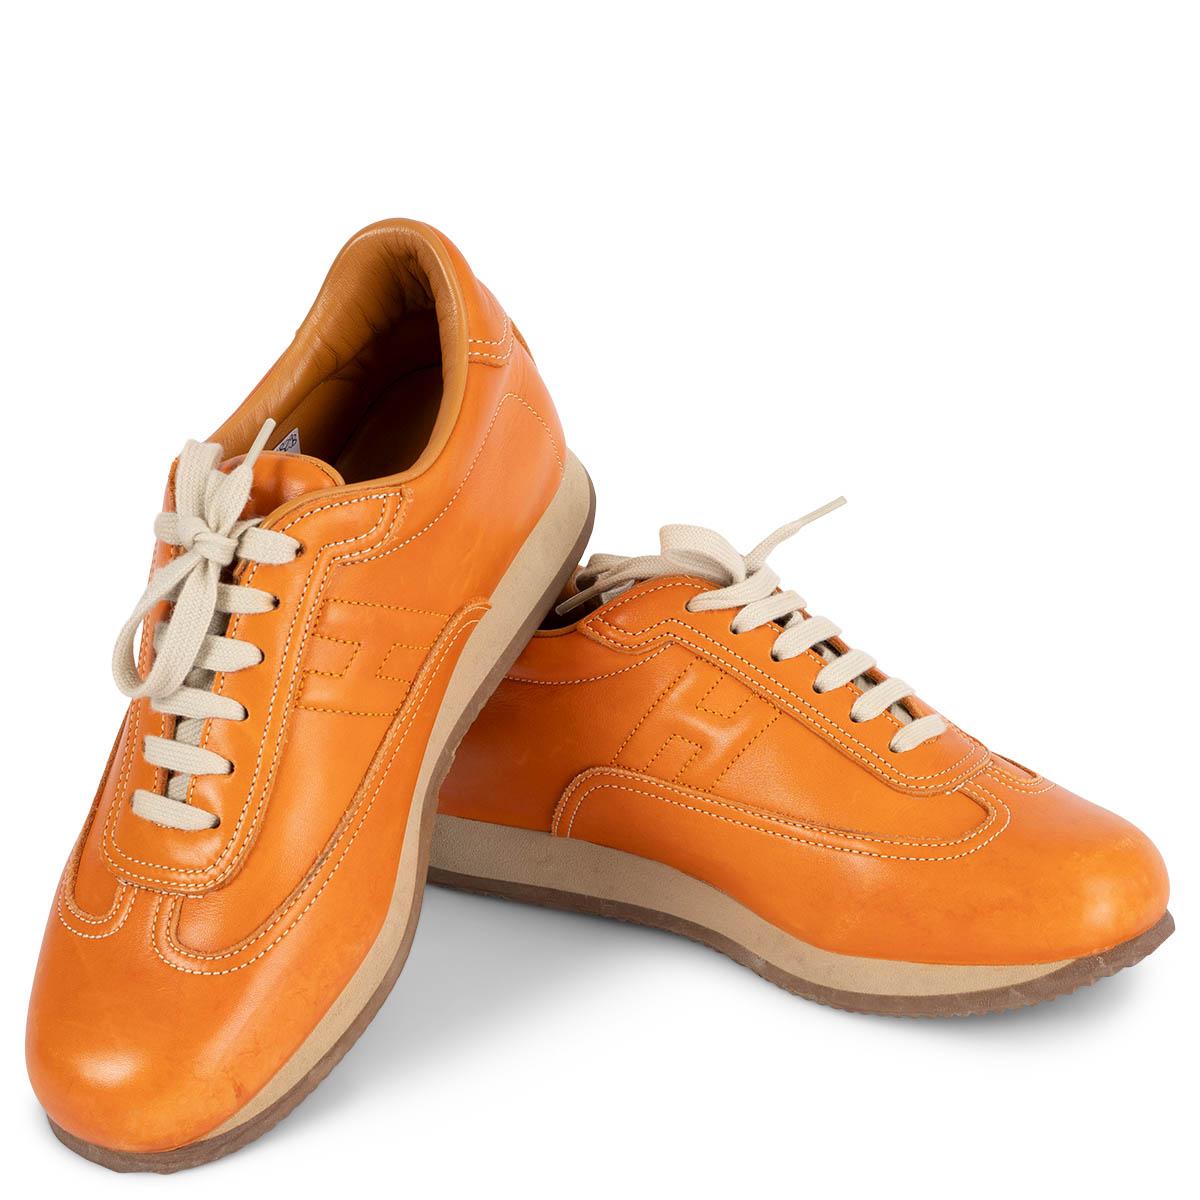 Women's HERMES orange leather QUICK Sneakers Shoes 38